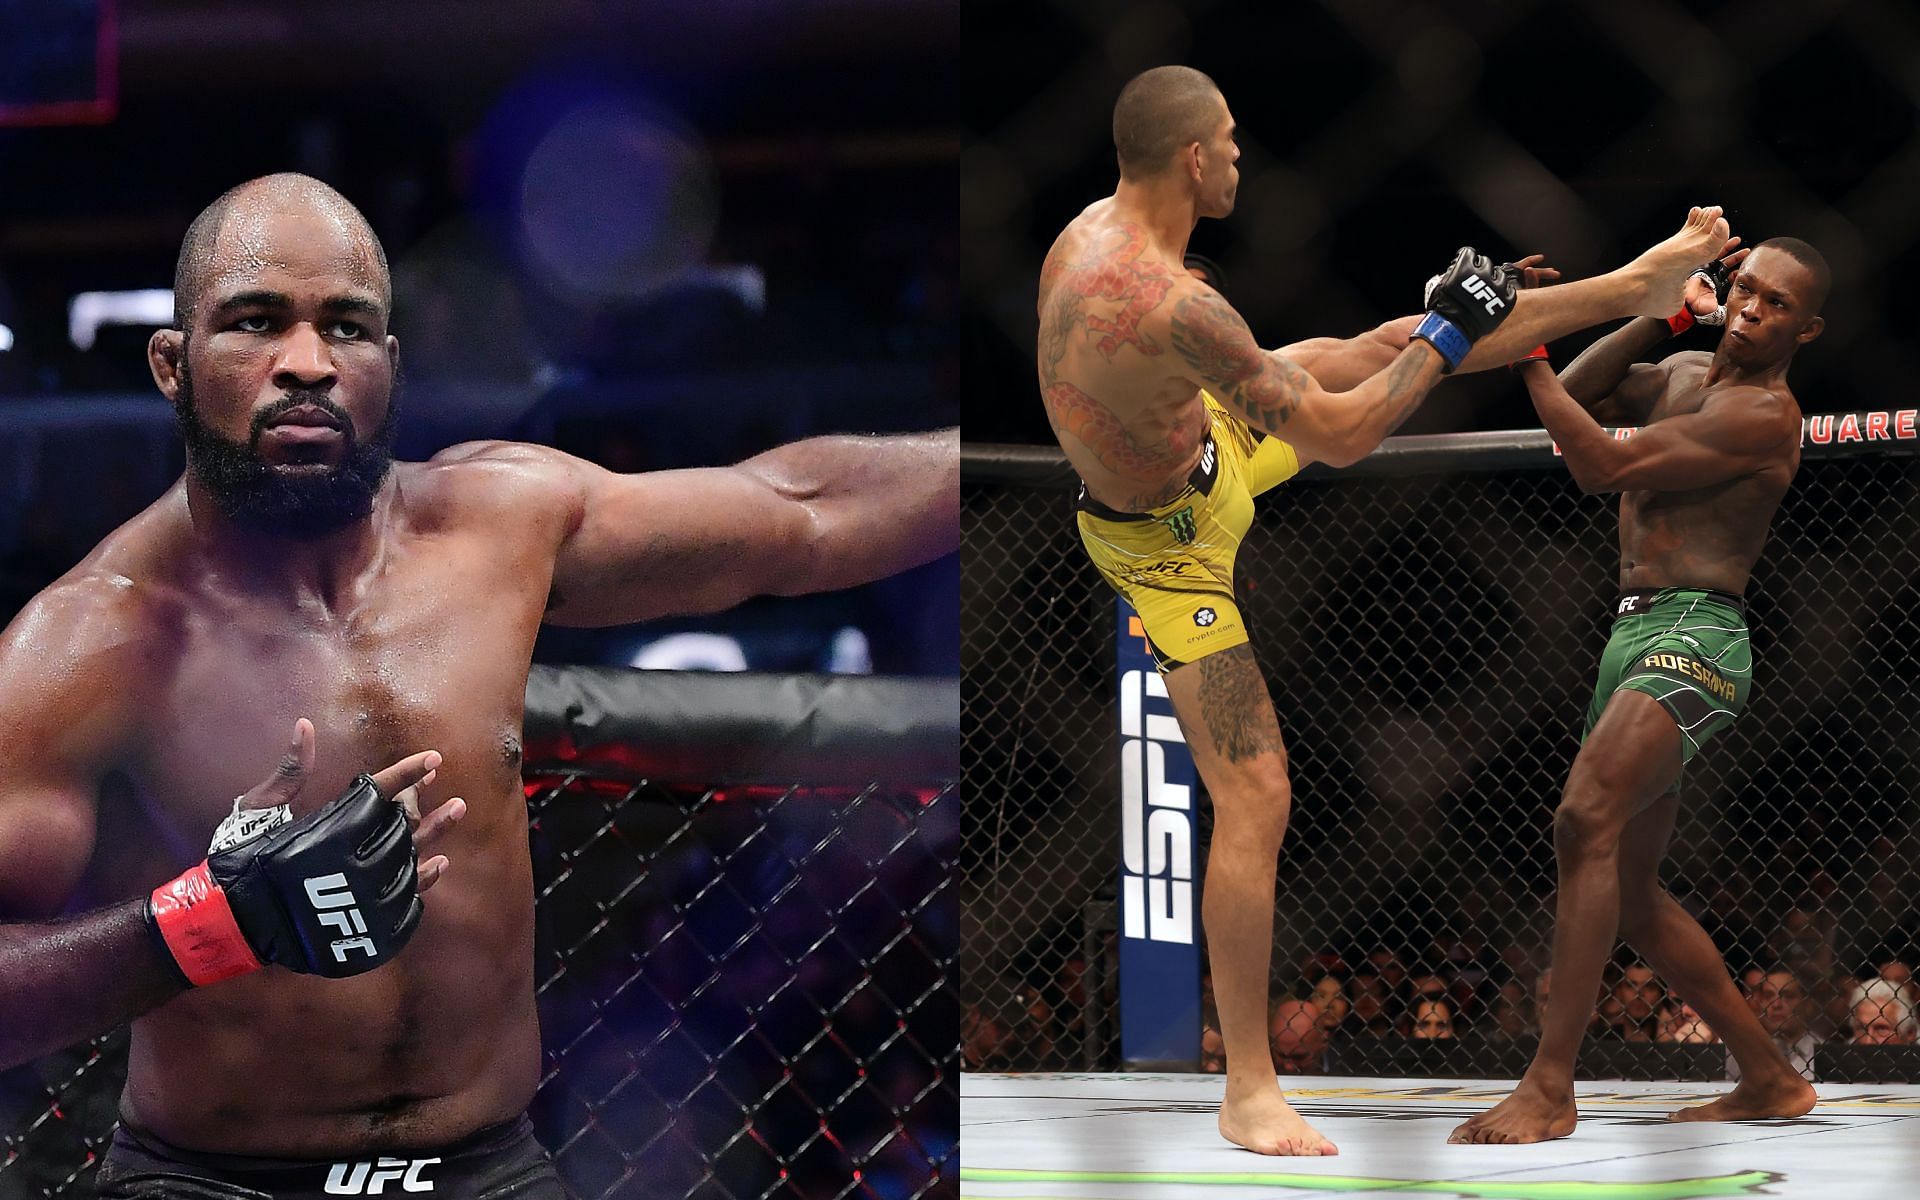 Corey Anderson (left) Israel Adesanya vs. Alex Pereira at UFC 281 (right) [Image Courtesy: Getty Images]